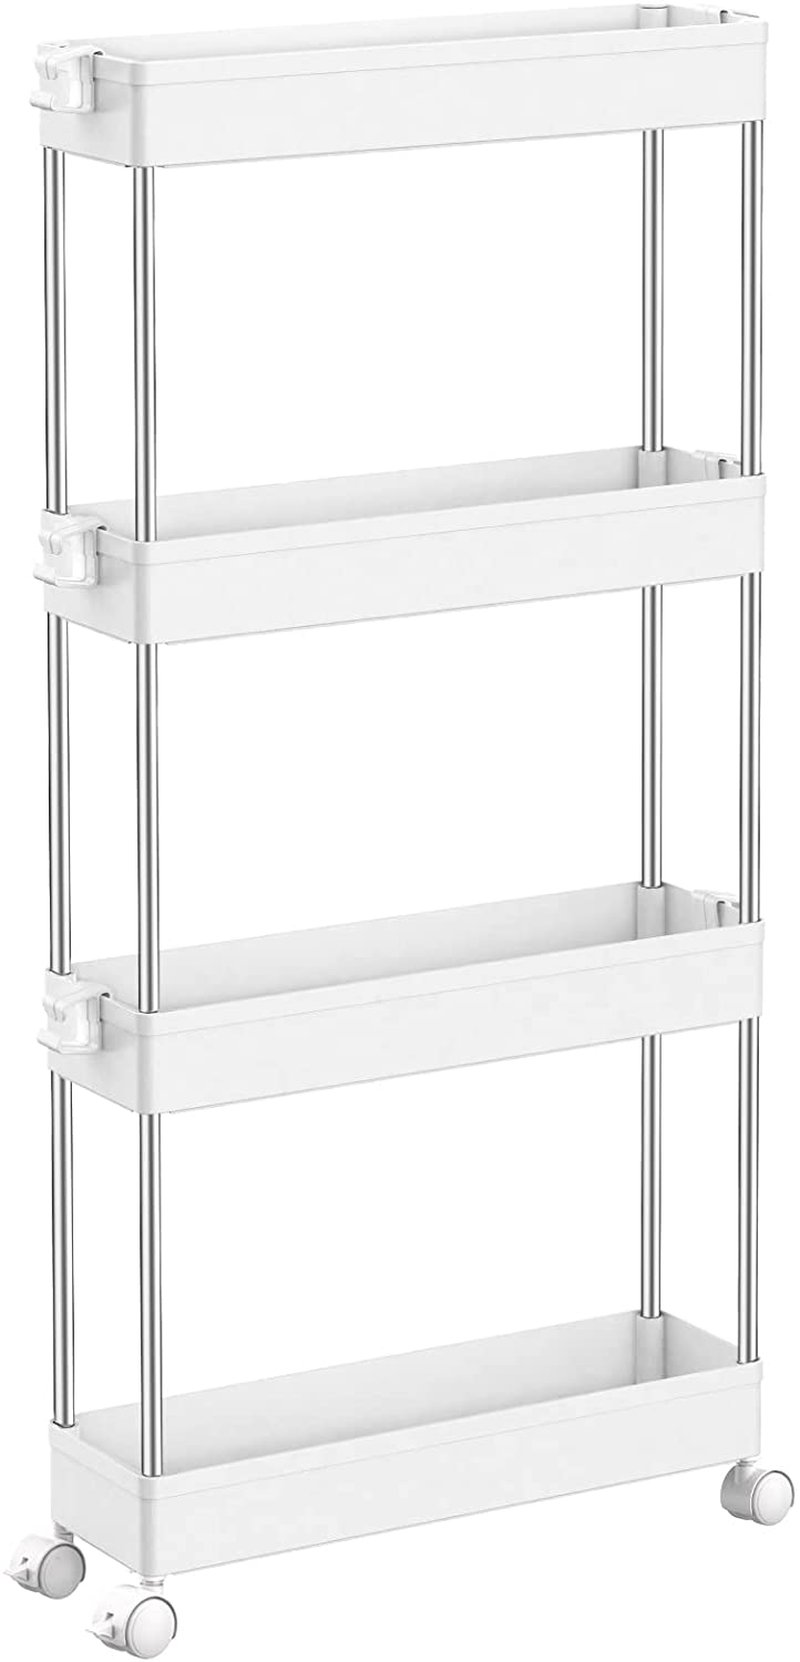 SPACEKEEPER 4 Tier Slim Storage Cart Mobile Shelving Unit Organizer Slide Out Storage Rolling Utility Cart Tower Rack for Kitchen Bathroom Laundry Narrow Places, Plastic & Stainless Steel, White Home & Garden > Kitchen & Dining > Food Storage SPACEKEEPER White  